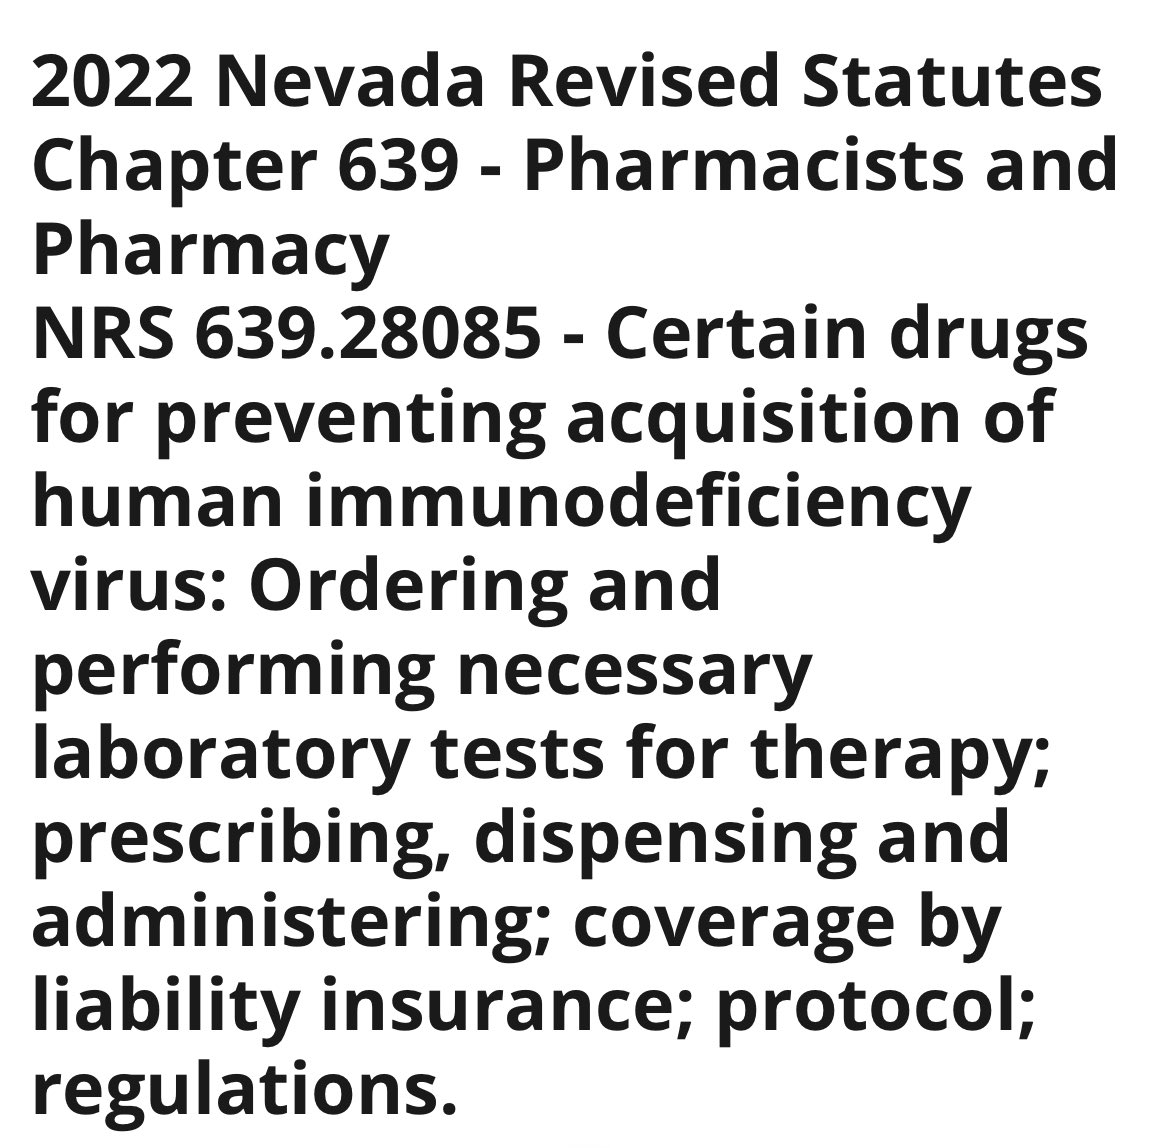 @BrutalBrittany2: The bill references this state law. Nevada thinks if a ch...